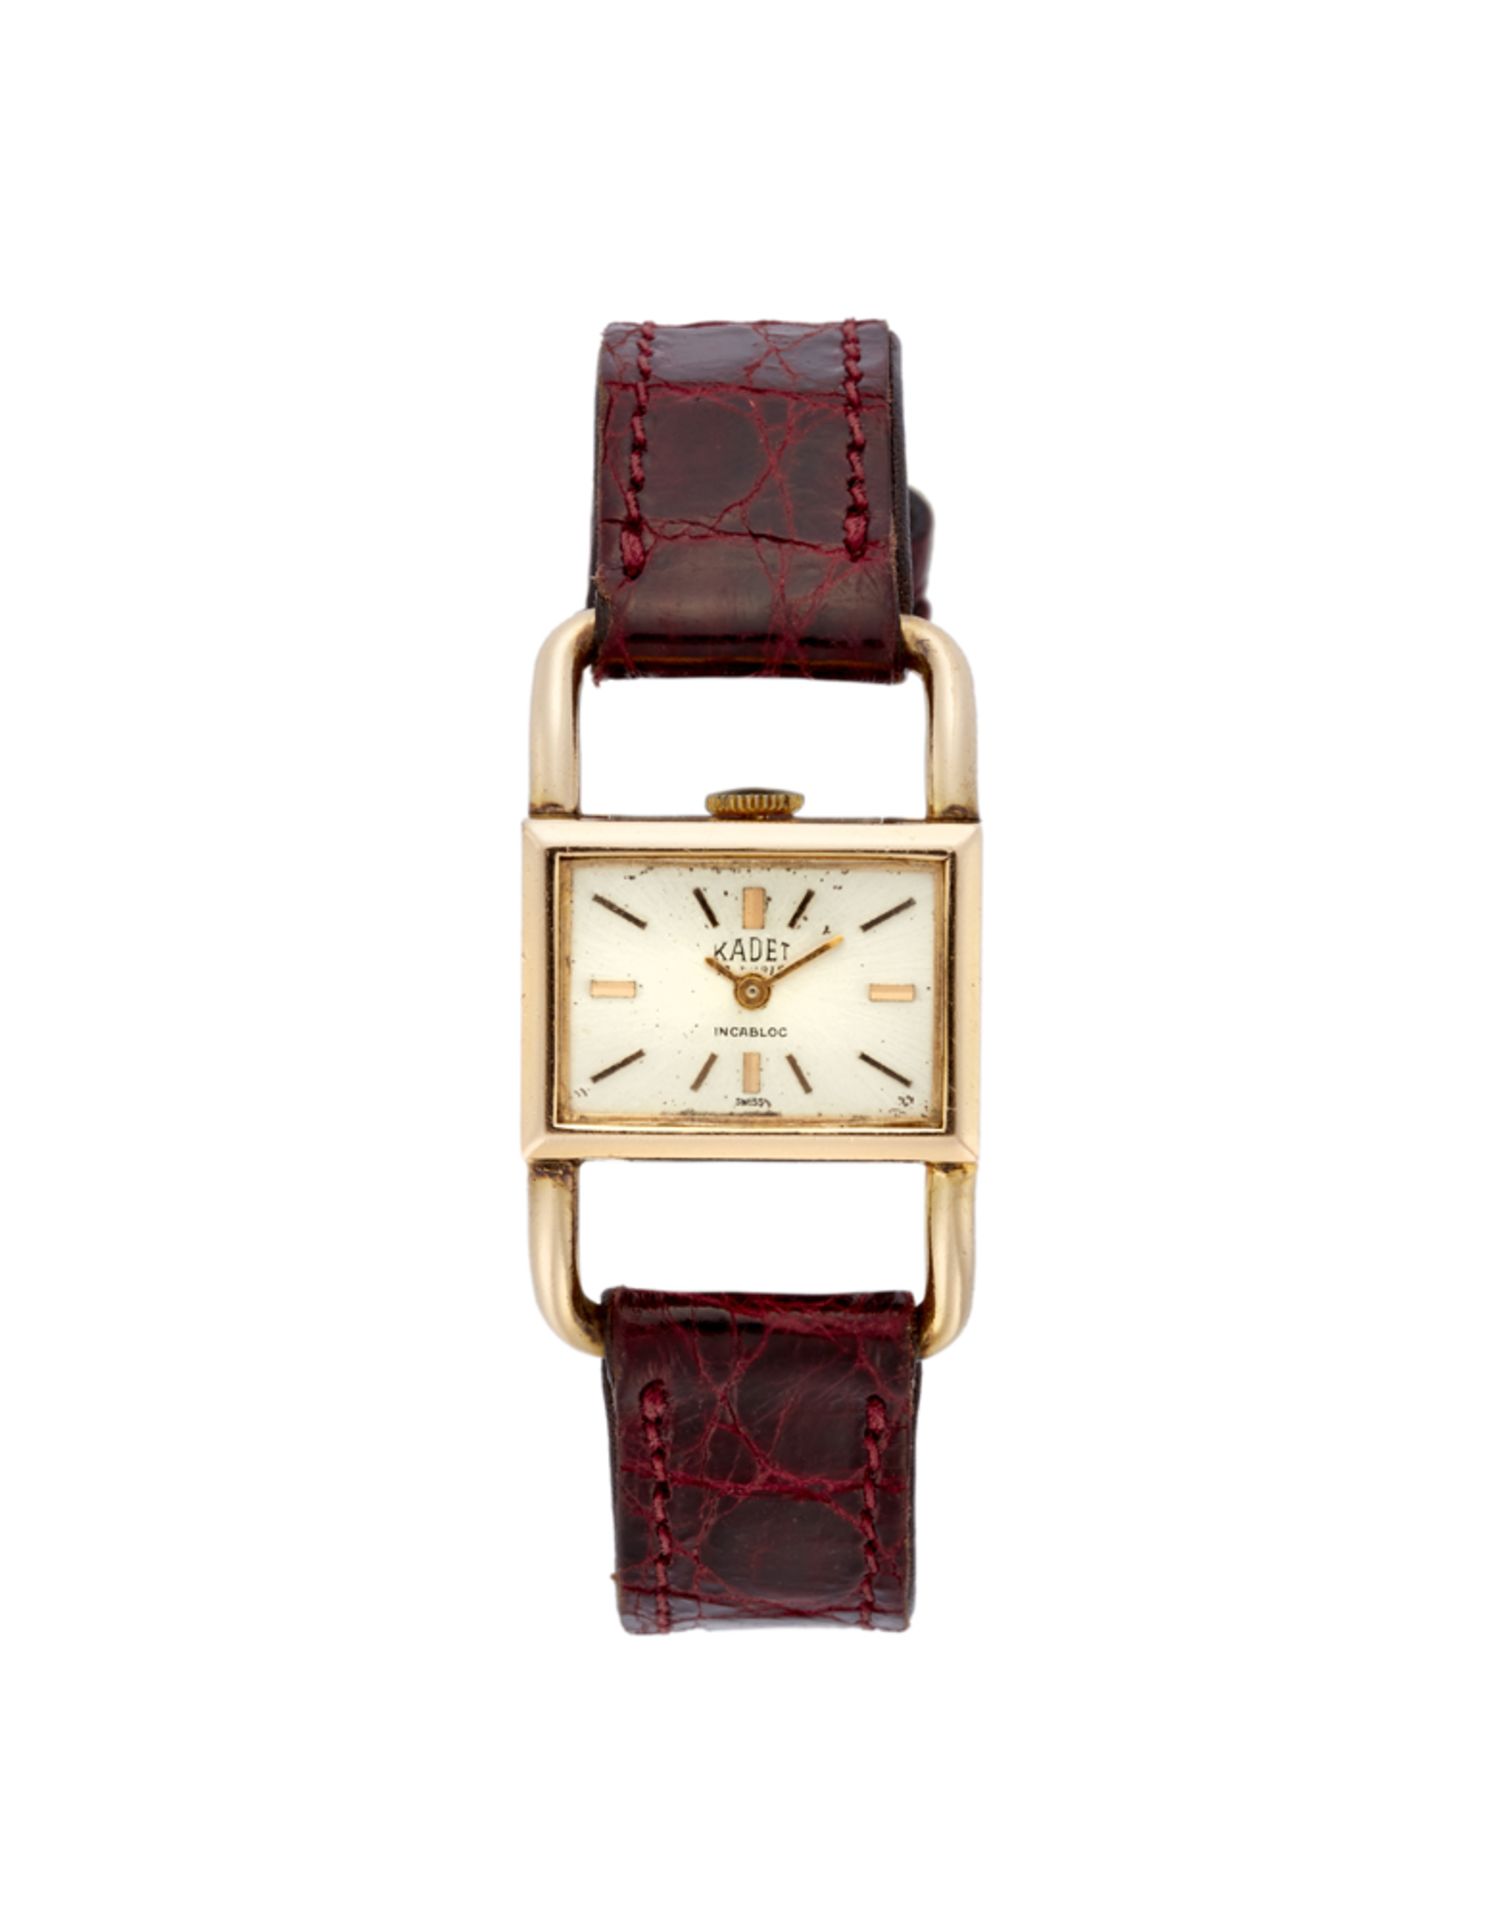 KADET<br>Lady's steel and metal plated-gold wristwatch<br>1960s<br>Dial signed<br>Manual-wind moveme